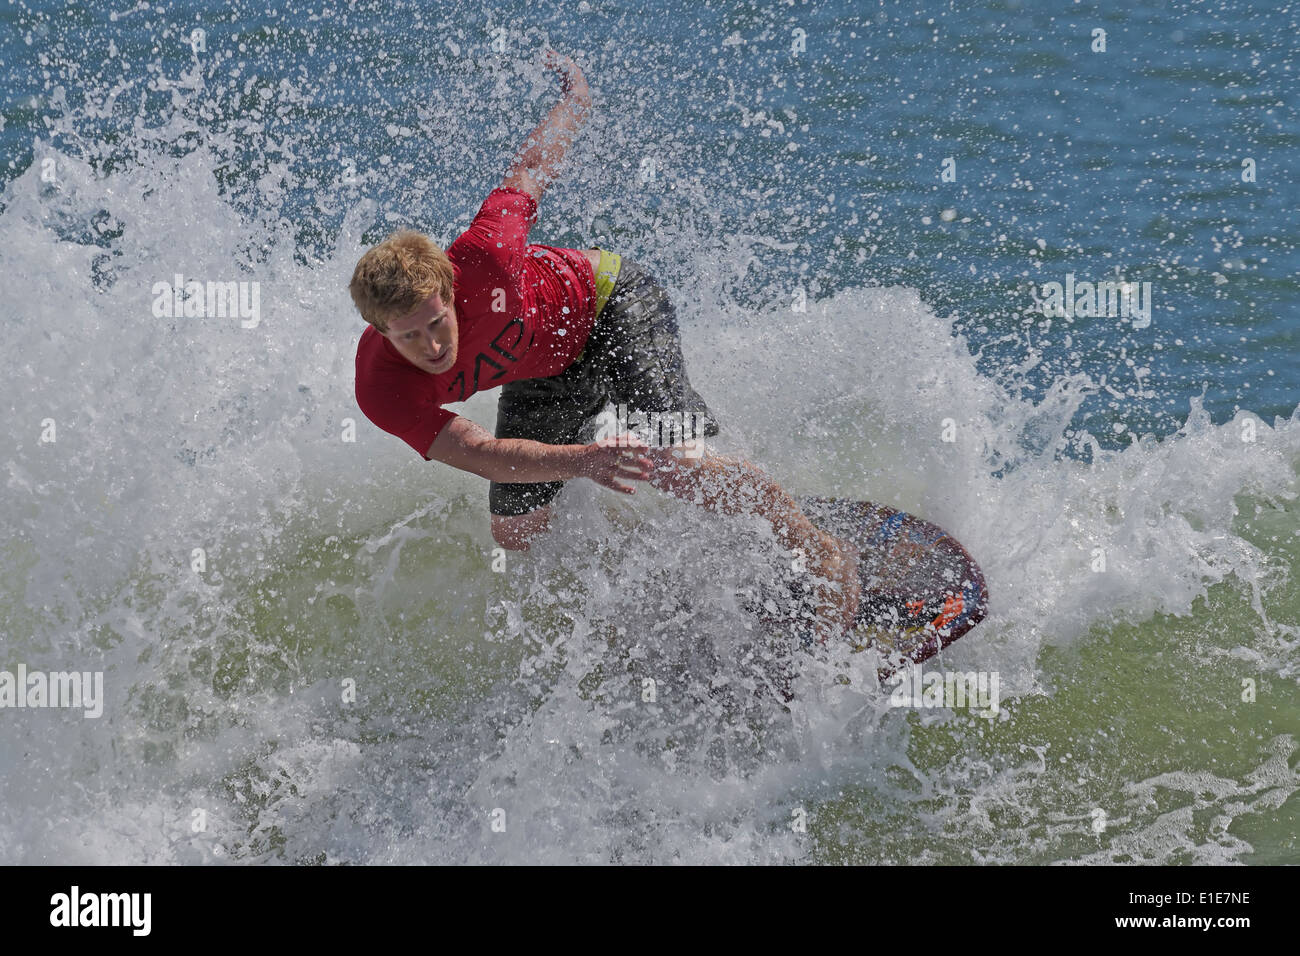 Skimboard Competitor Rides a Wave Stock Photo